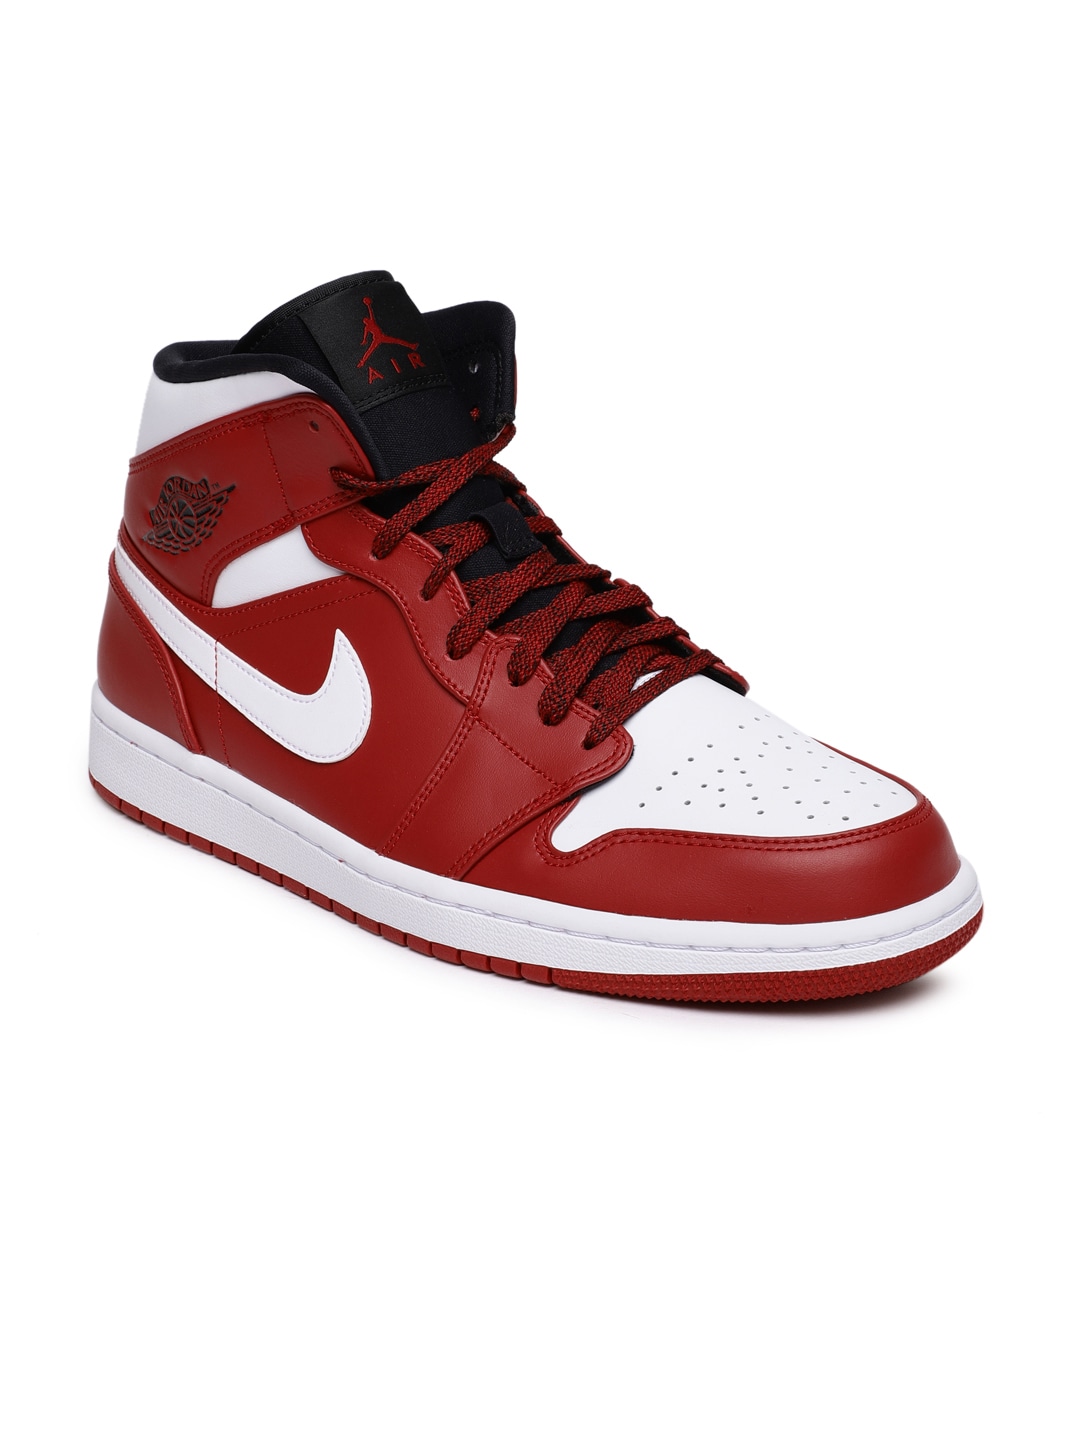 Nike Jordan Impact Tr Red Basketball Shoes for Men online in India at ...